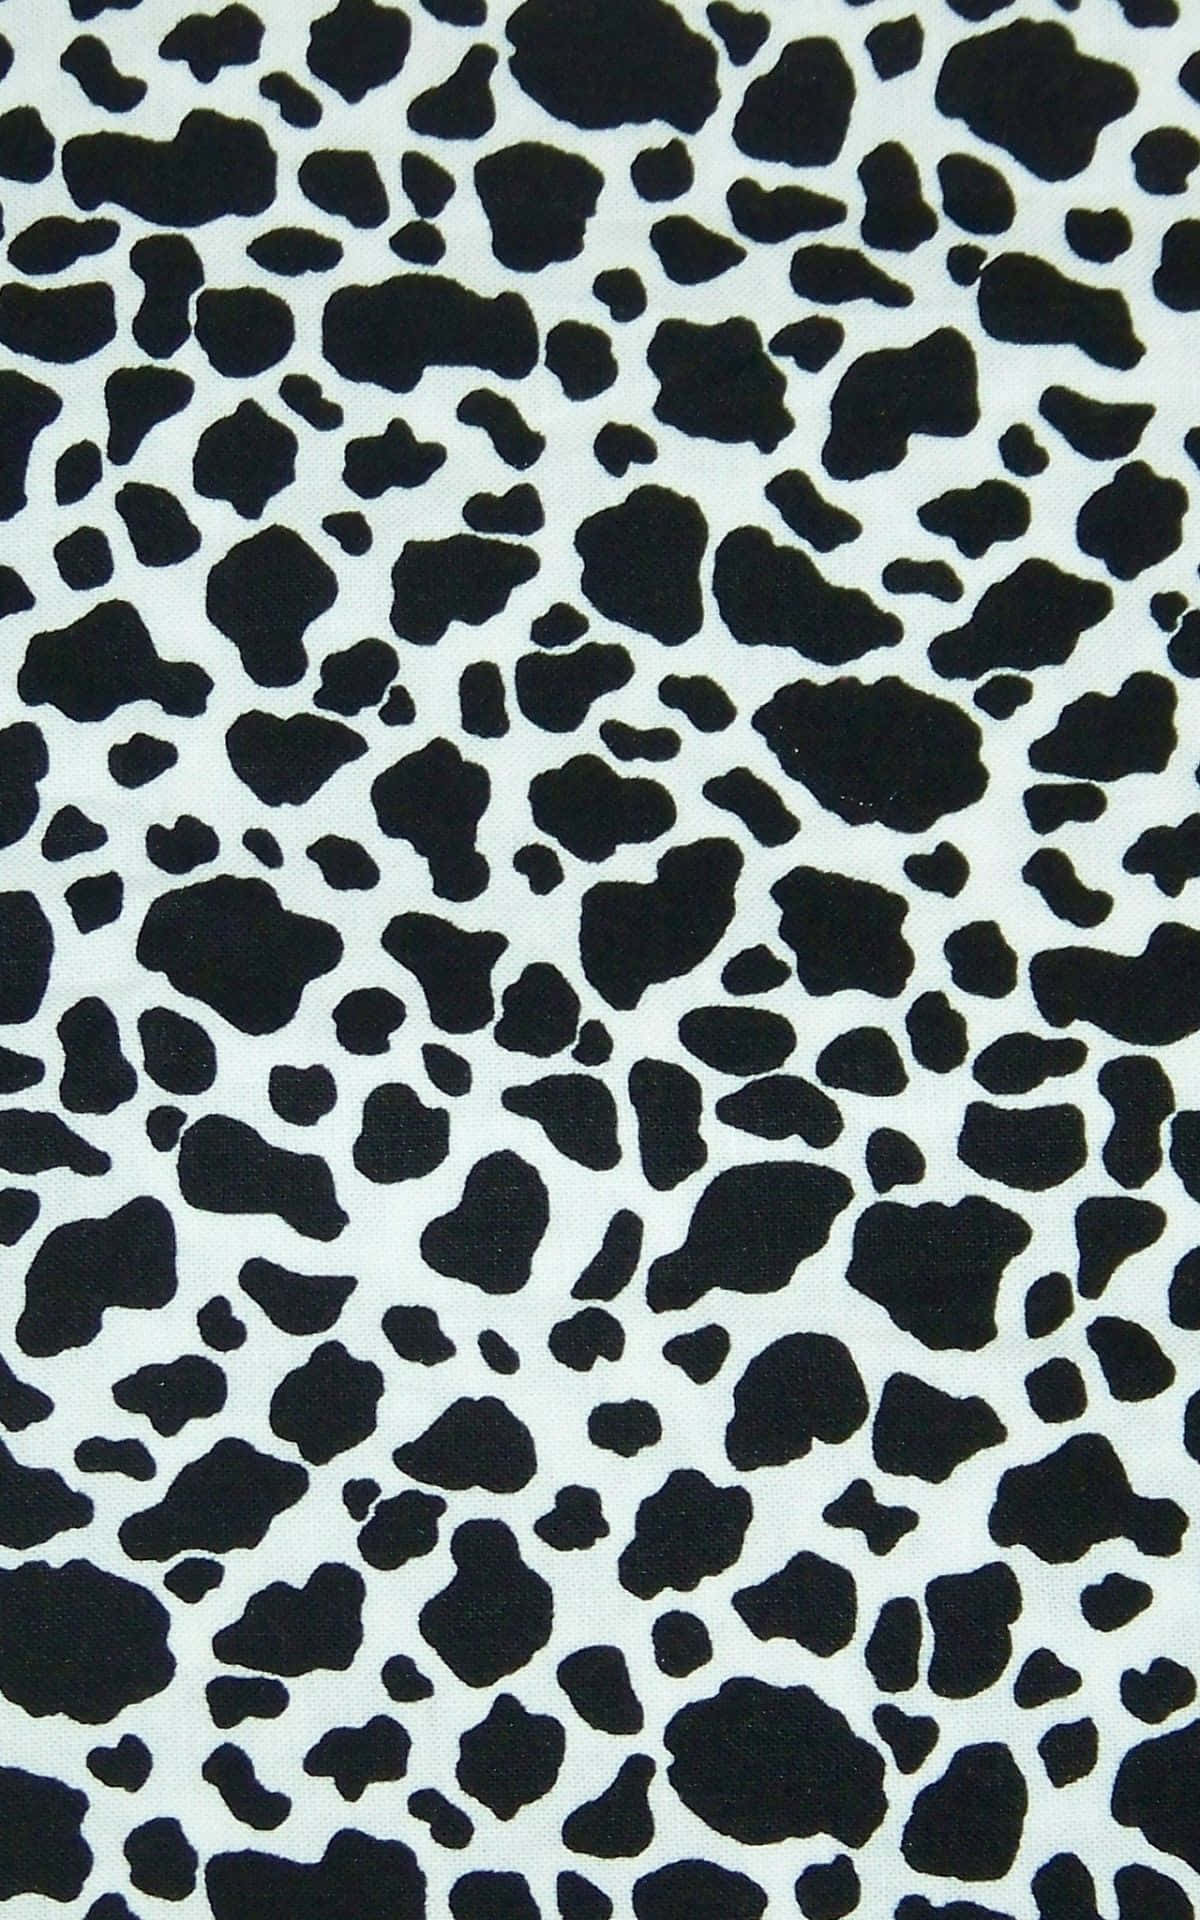 A Black And White Cow Print Fabric Wallpaper